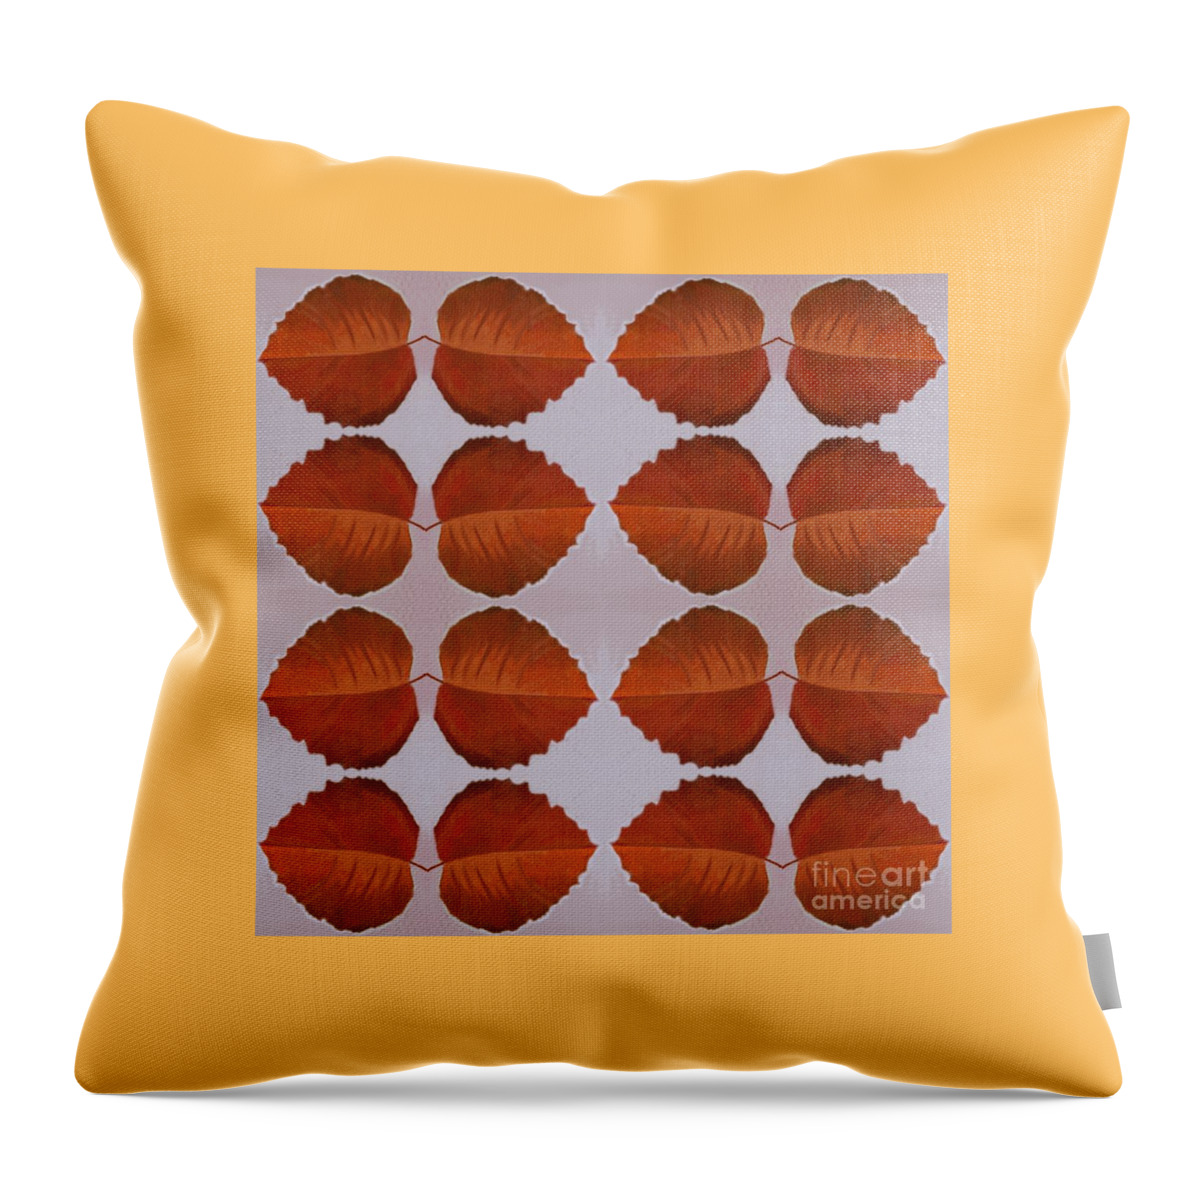 Red Leaves Throw Pillow featuring the digital art Fallen Leaves Arrangement by Helena Tiainen